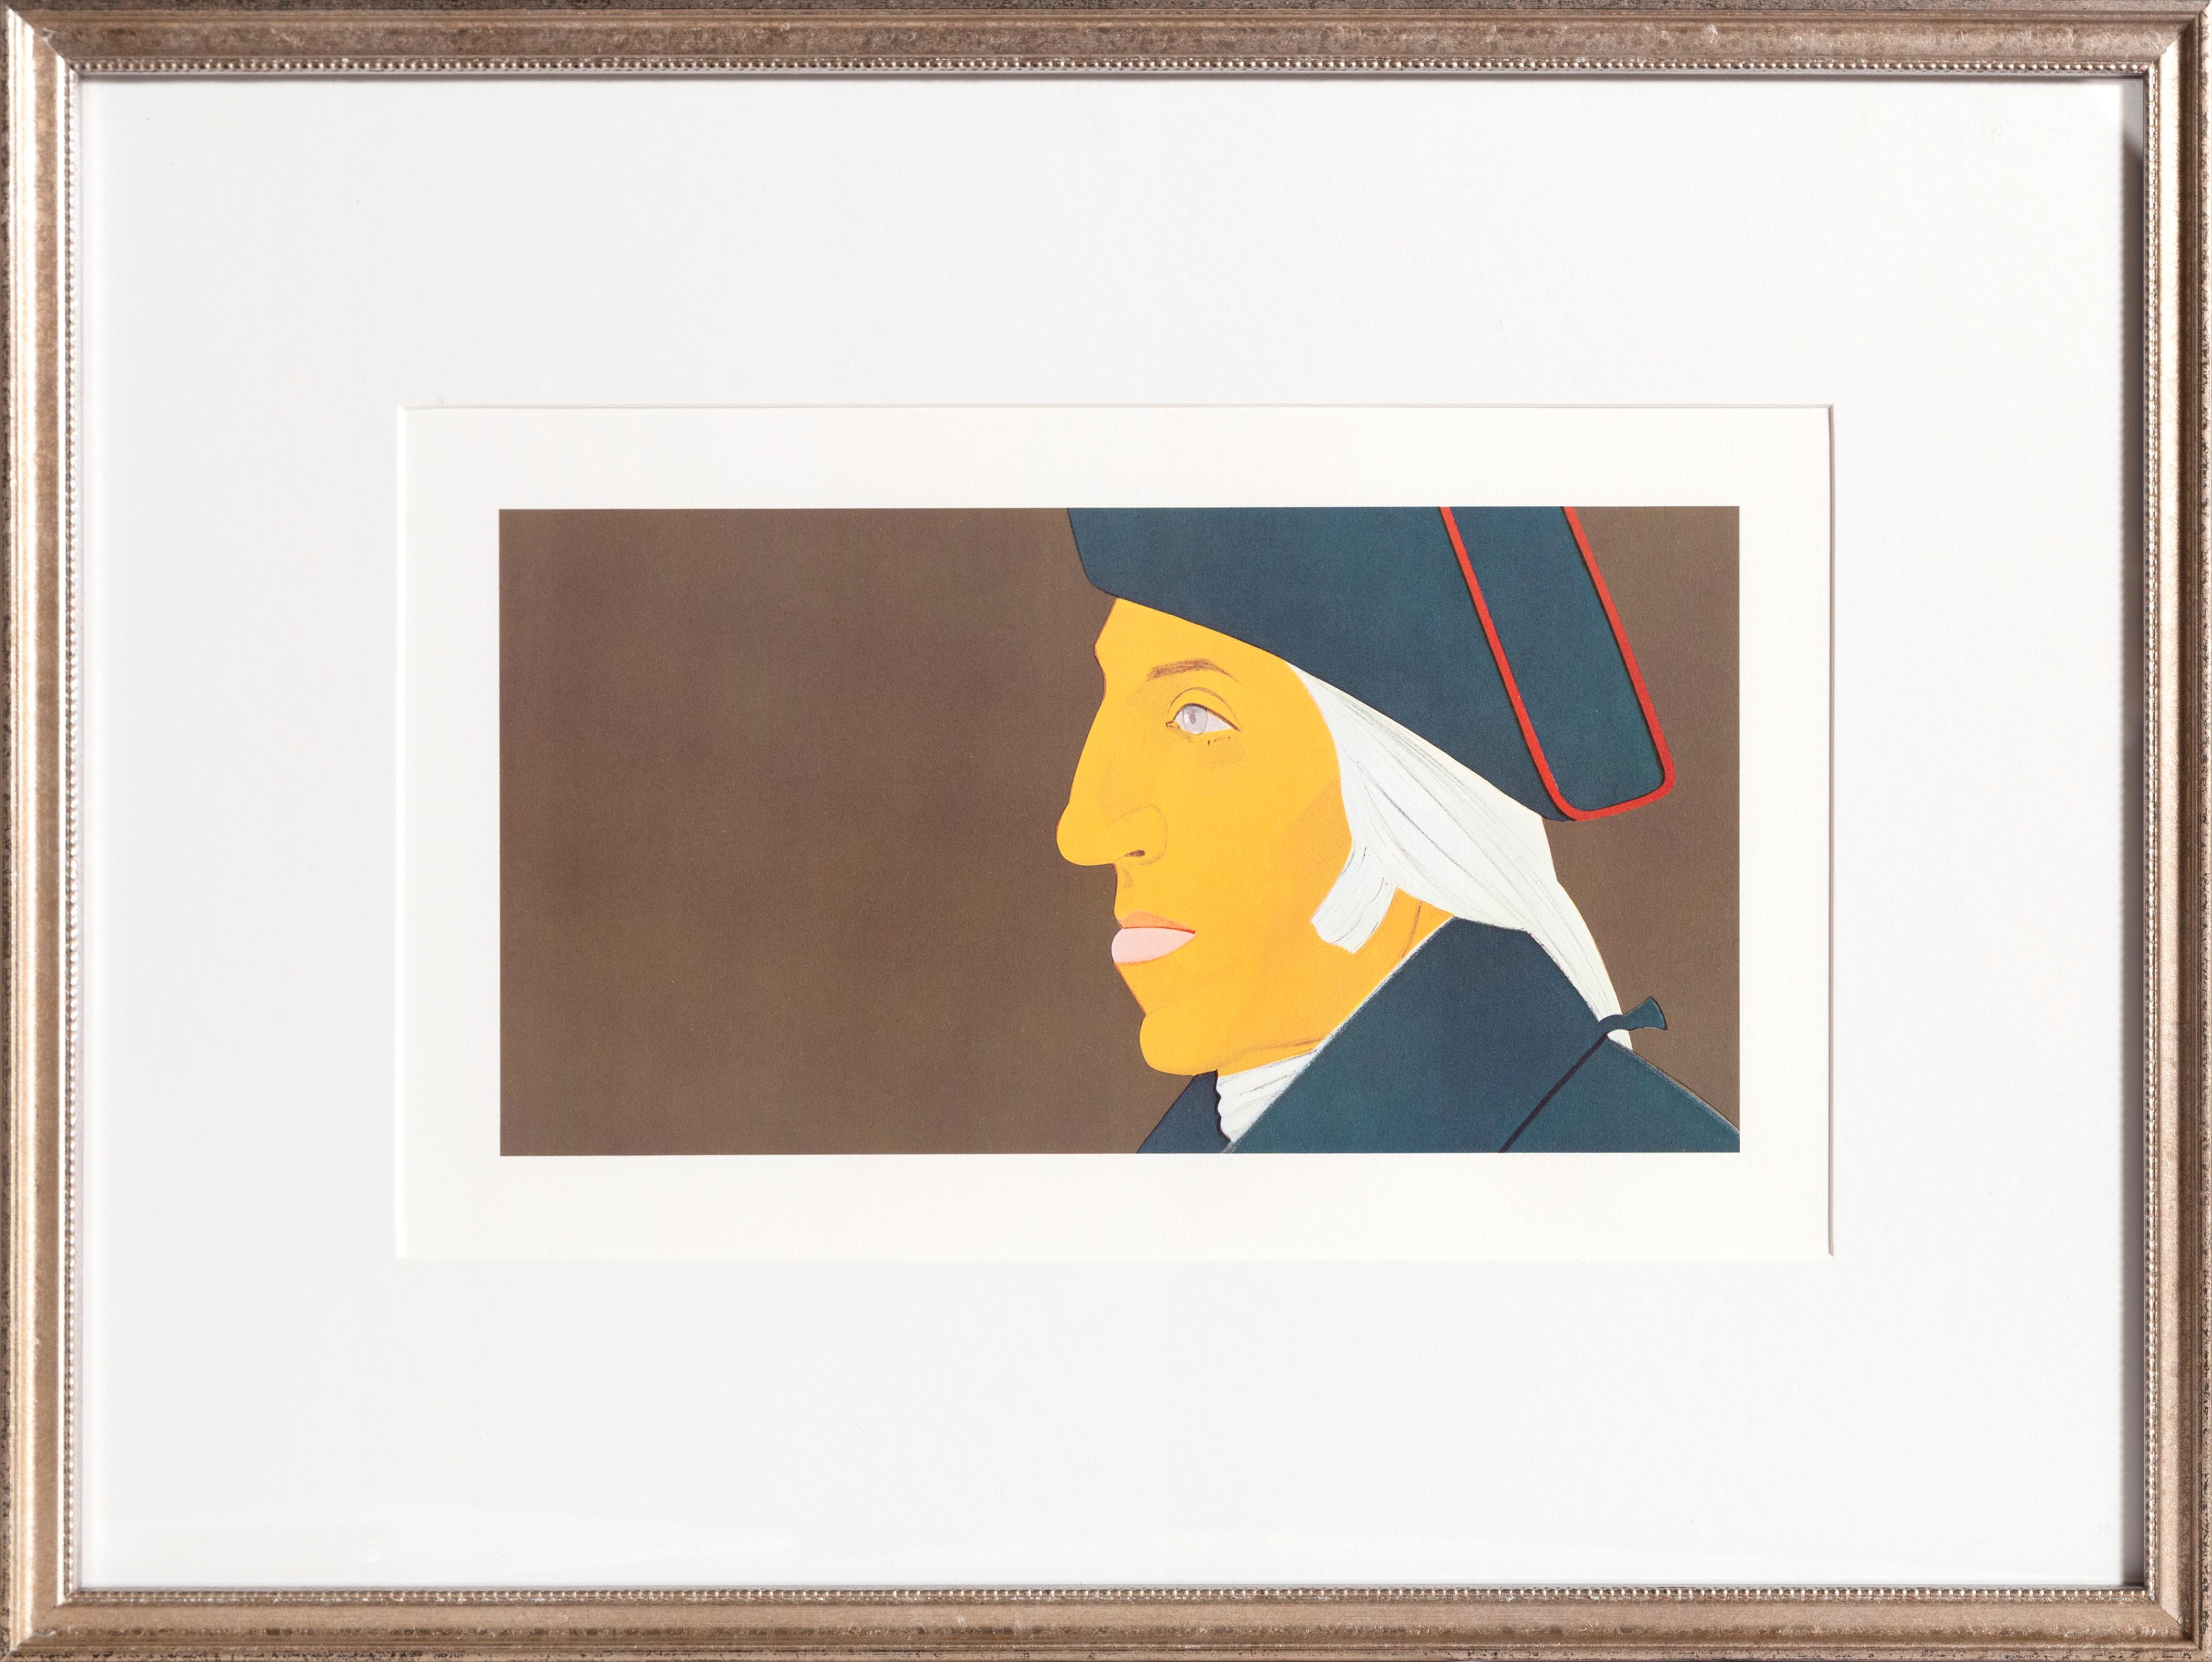 An original print from the Kent Bicentennial poster portfolio published by Lorillard. This side profile of the president is from the Kent Bicentennial Portfolio. Alex Katz is a leading figure painter of the new realism movement in contemporary art.